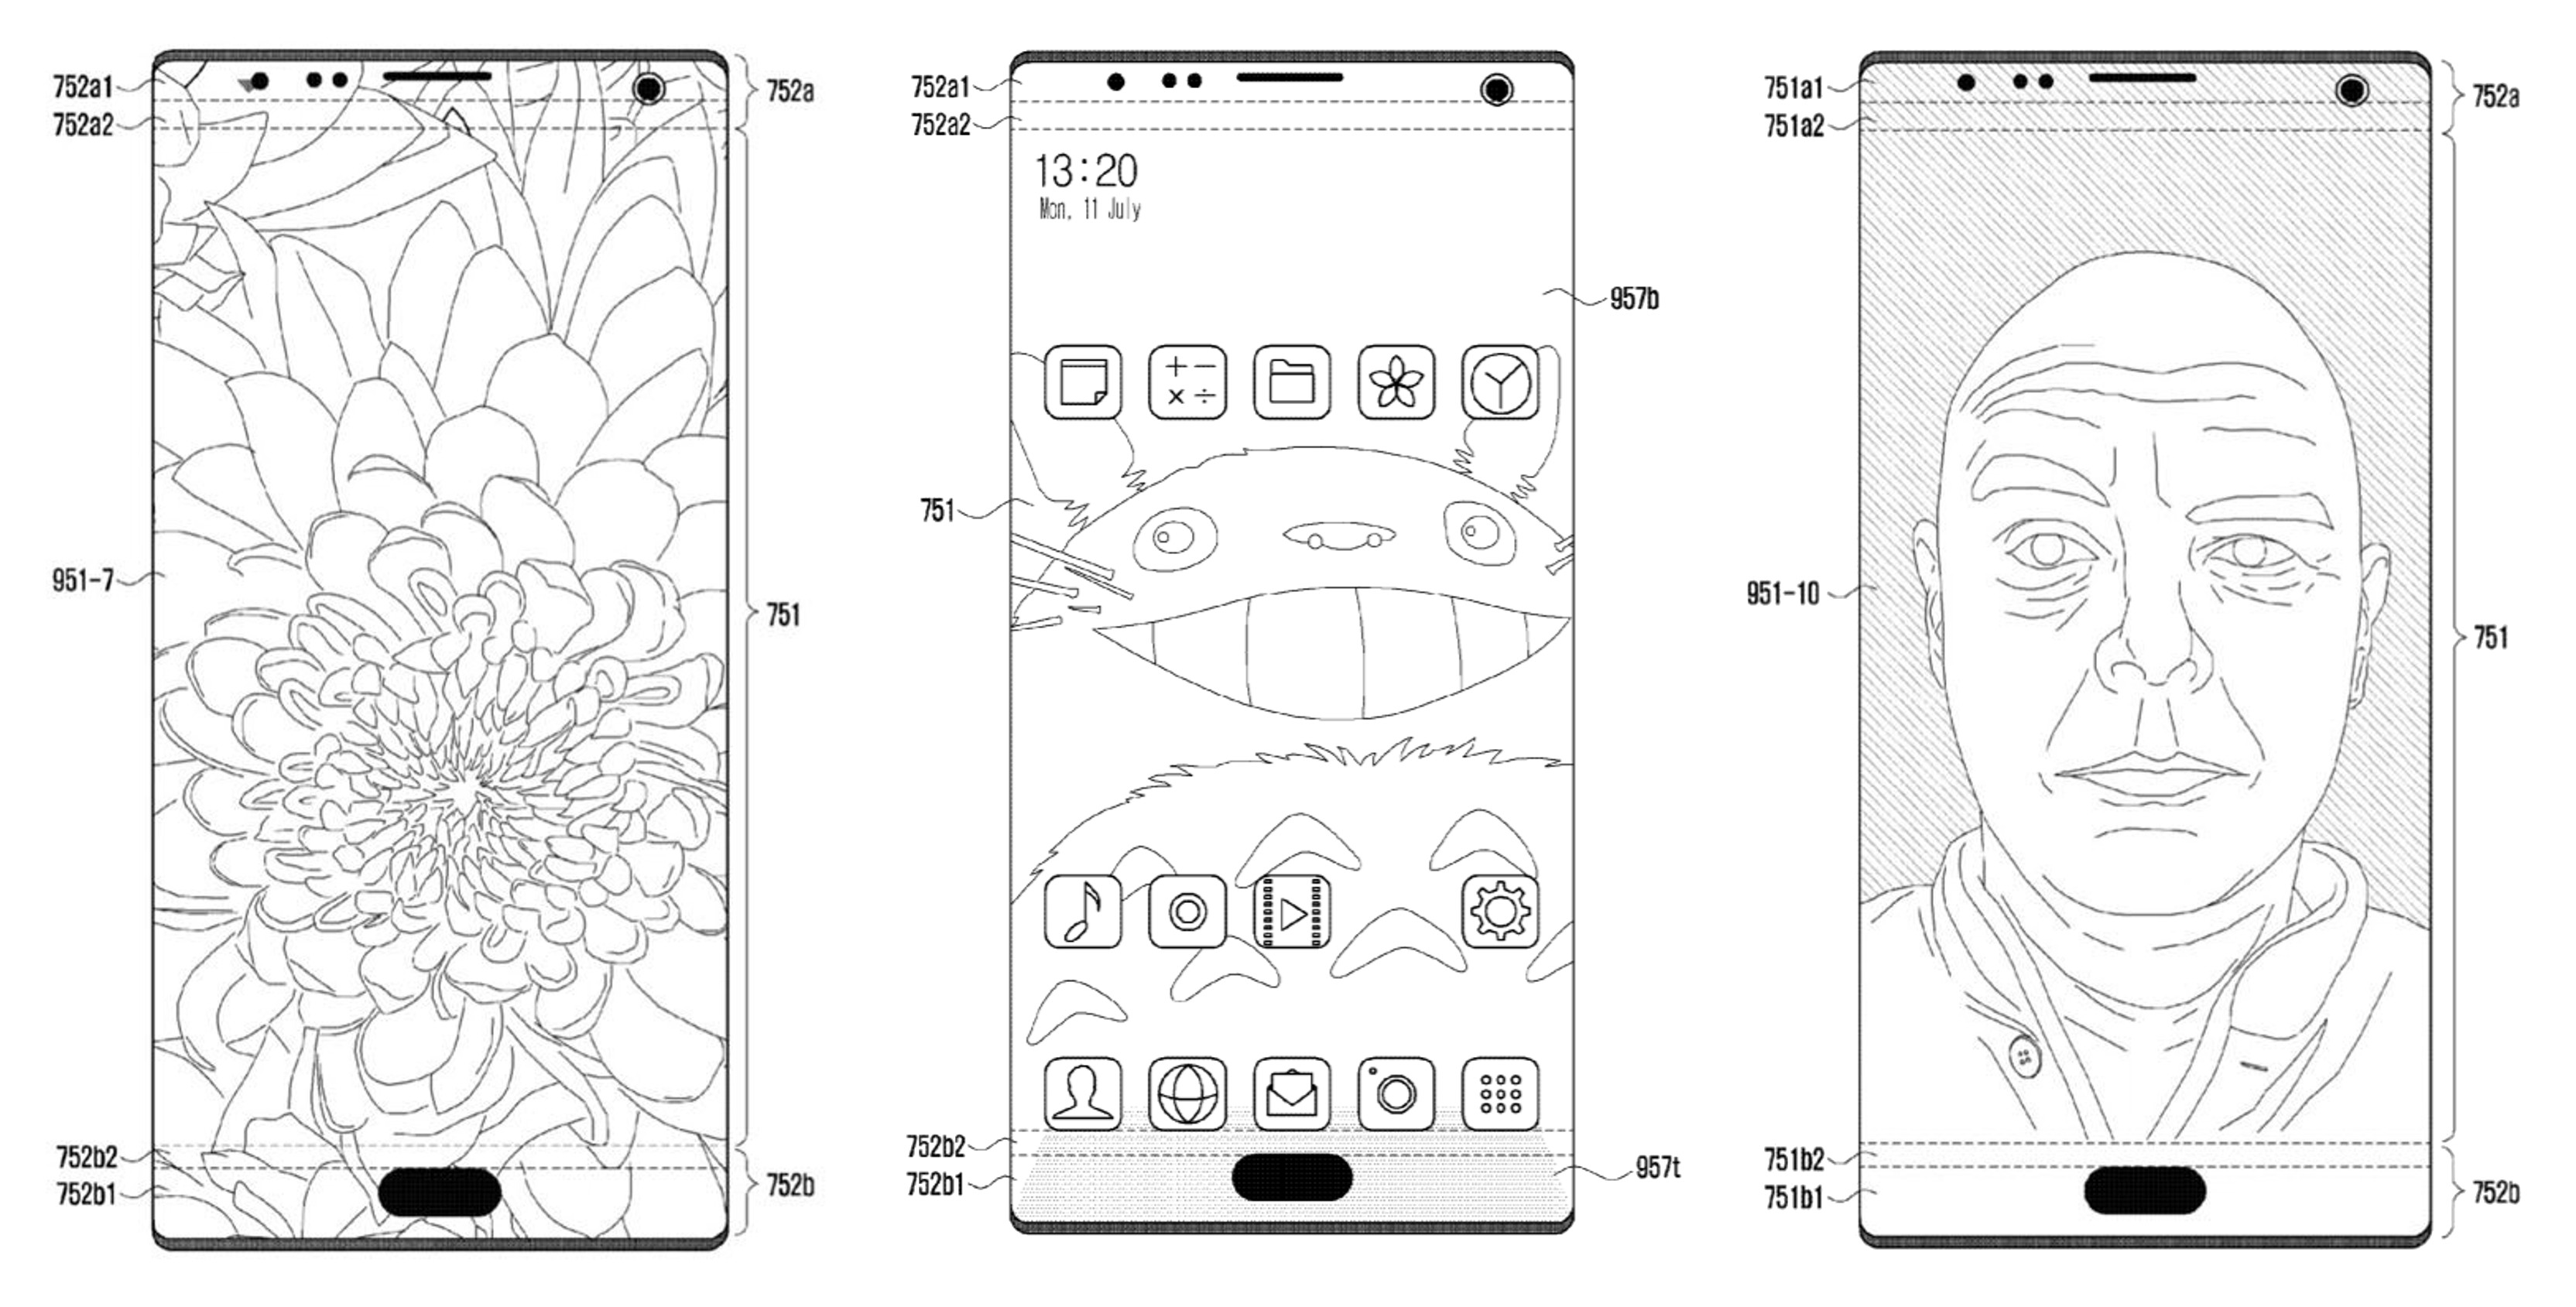 Mock-up images of Samsung's new patented device, displaying a screen with embedded camera, speaker, and sensors.